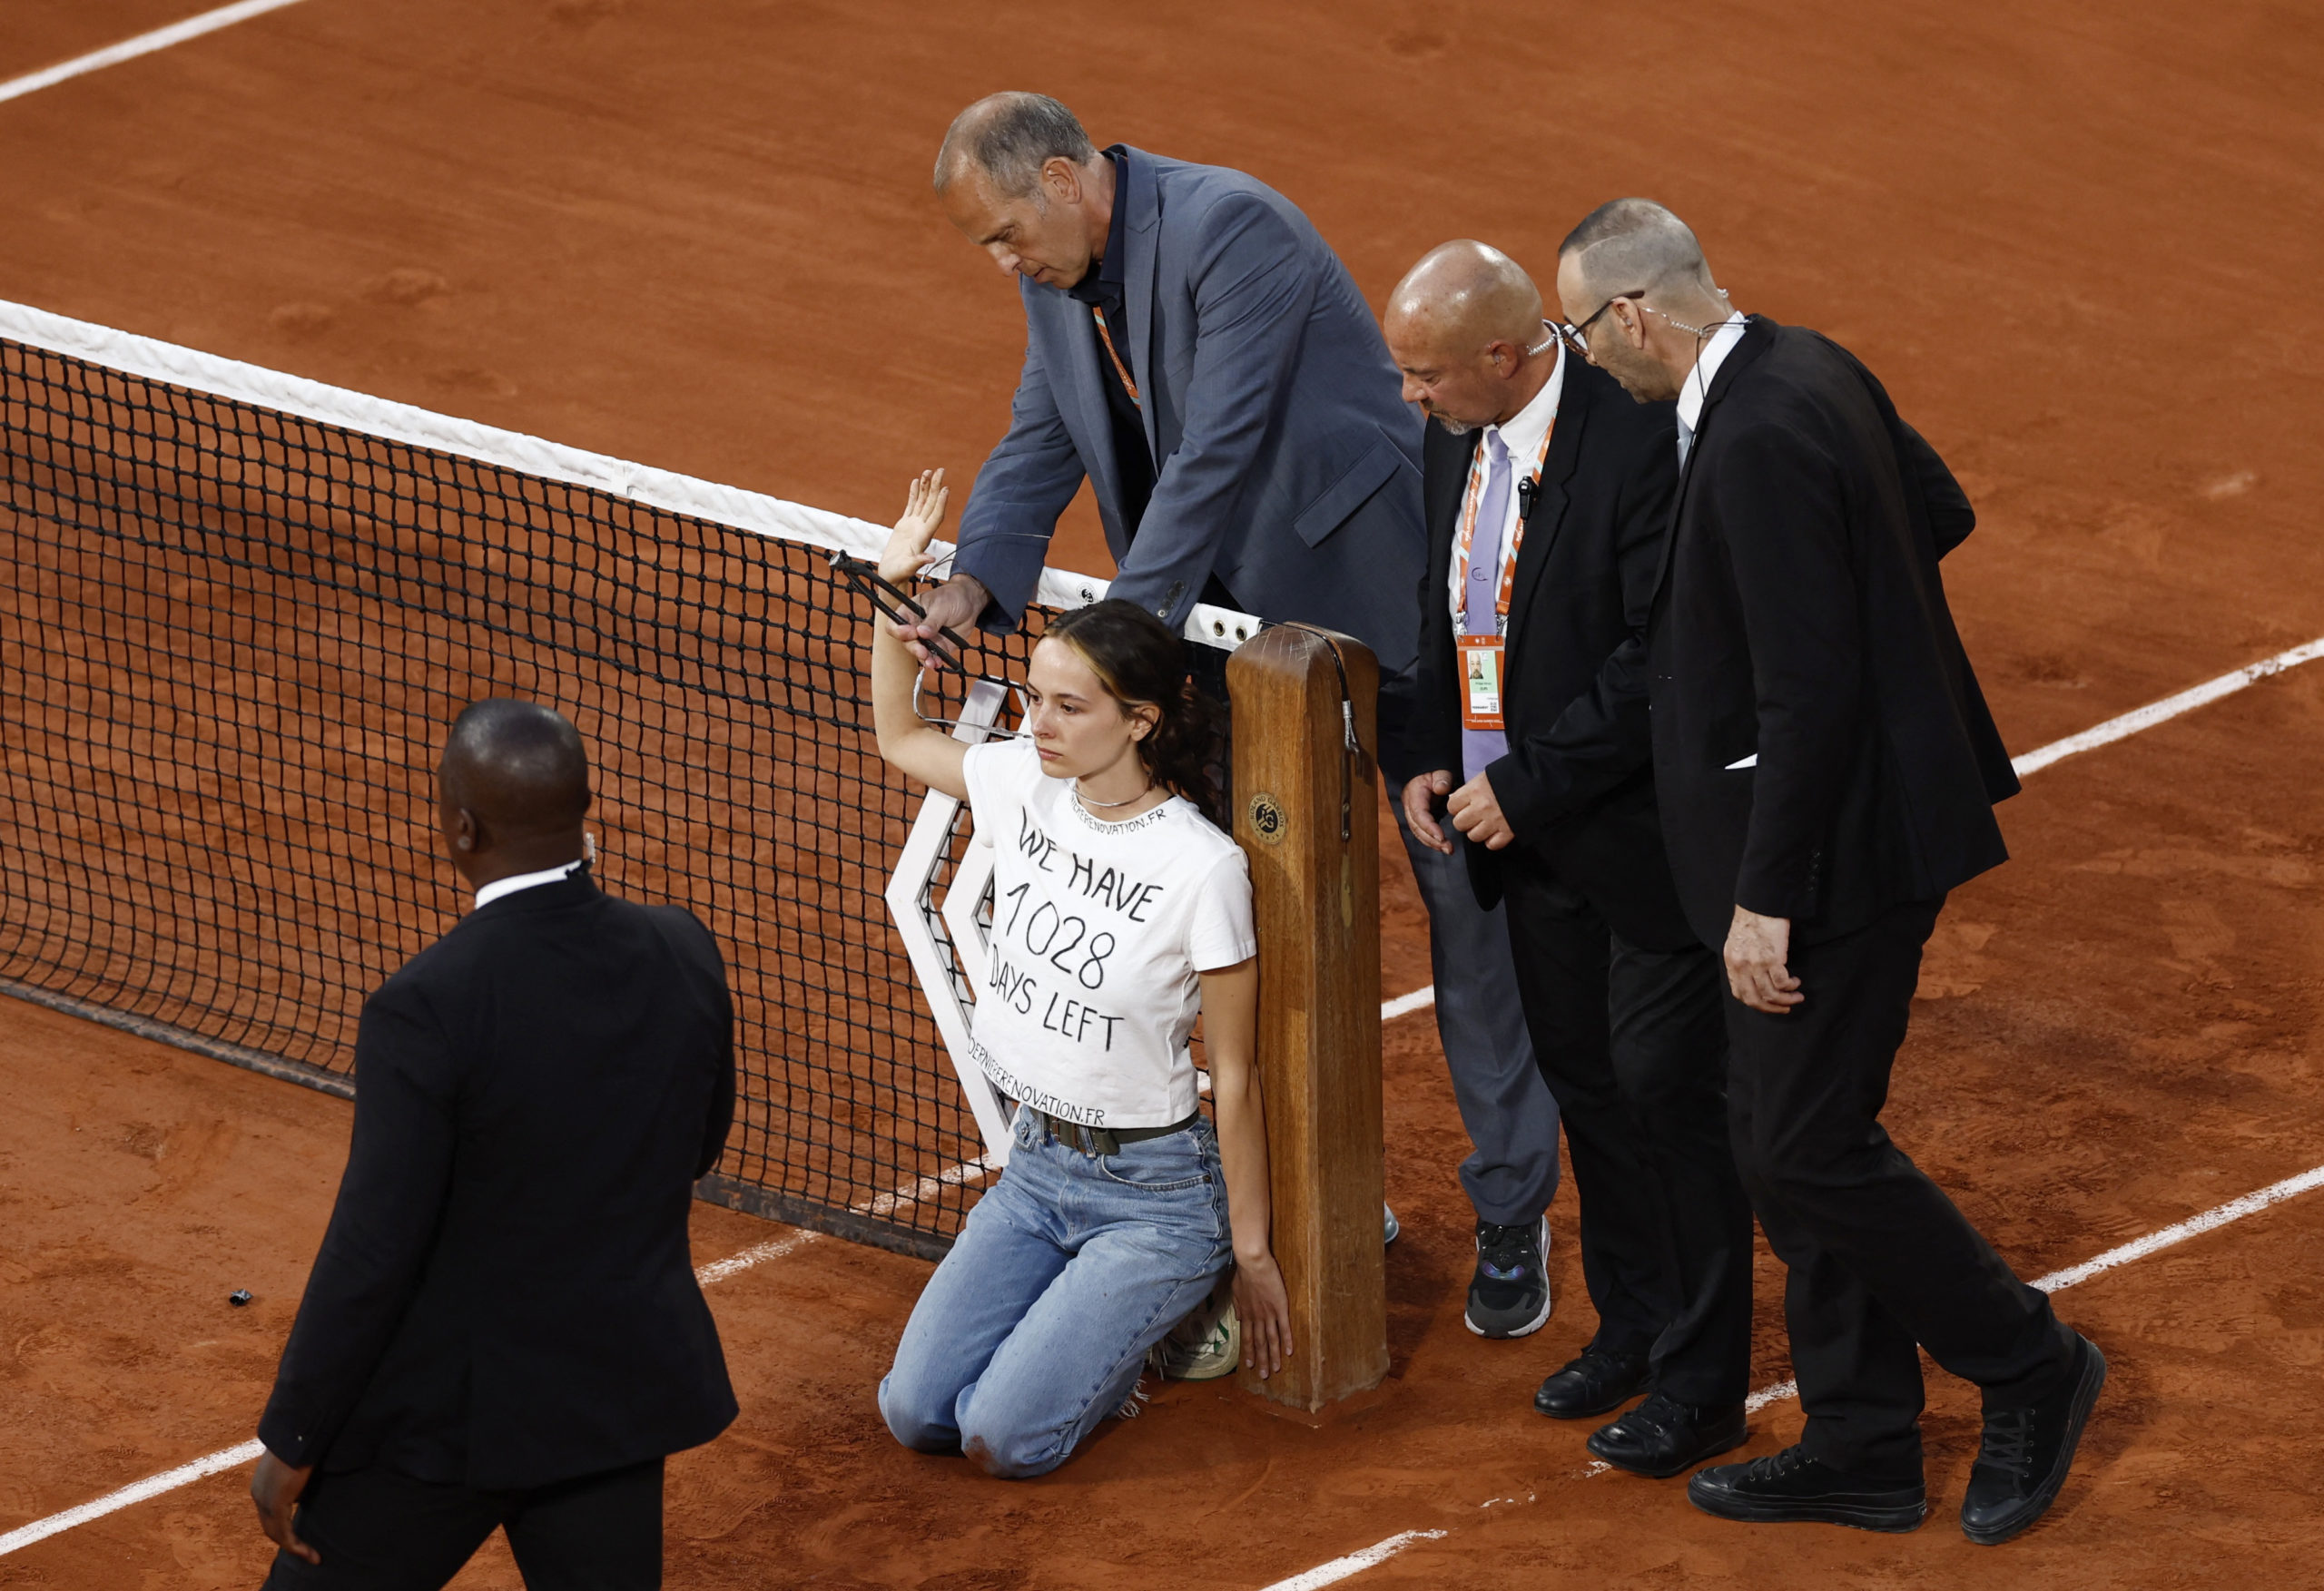 Tennis - French Open - Roland Garros, Paris, France - June 3, 2022 Protestor ties herself to the net during the semi final between Norway's Casper Ruud and Croatia's Marin Cilic as security members cut the ties REUTERS/Yves Herman